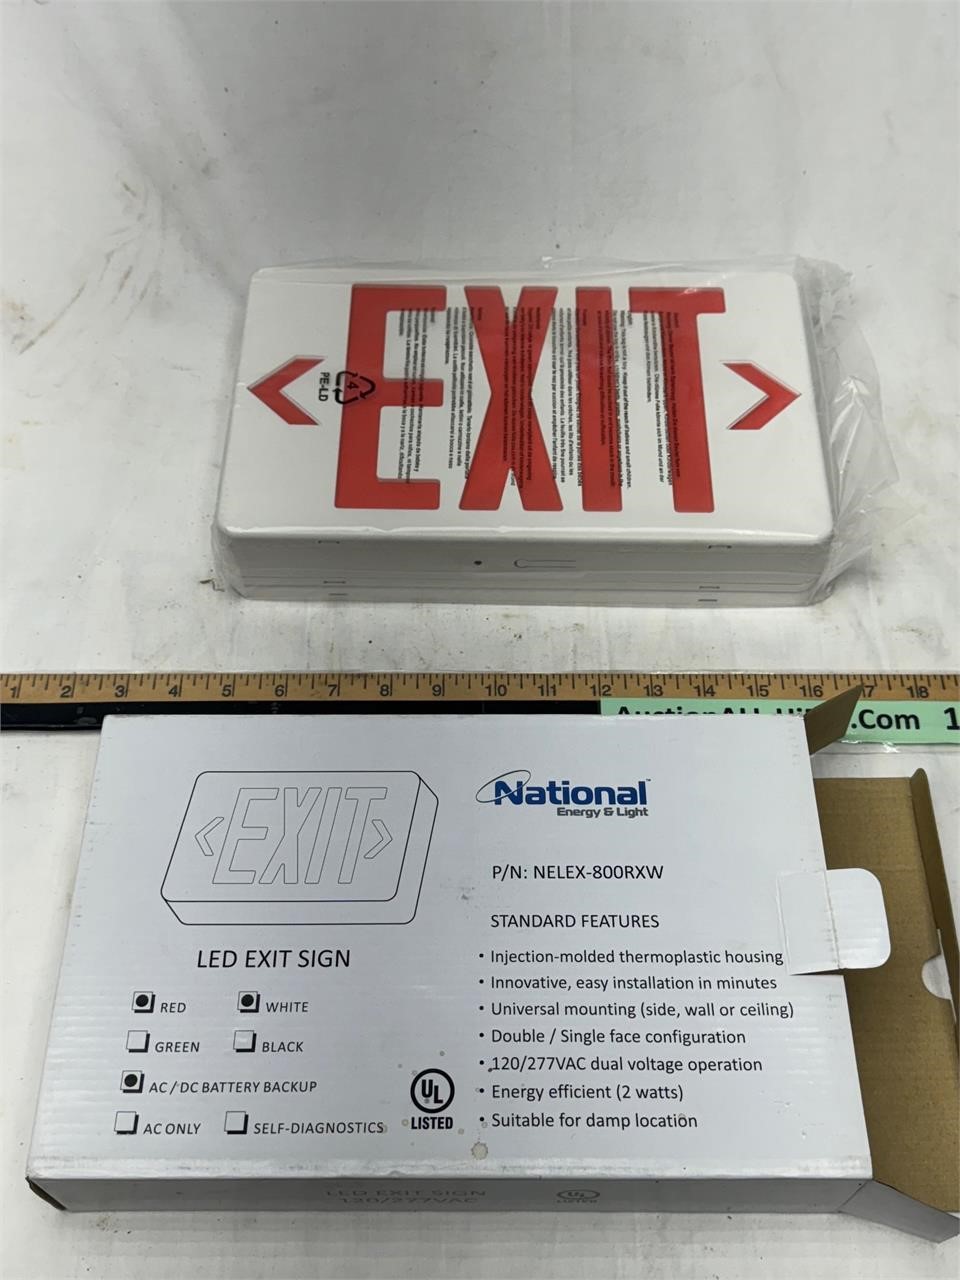 Brand new Exit Sign